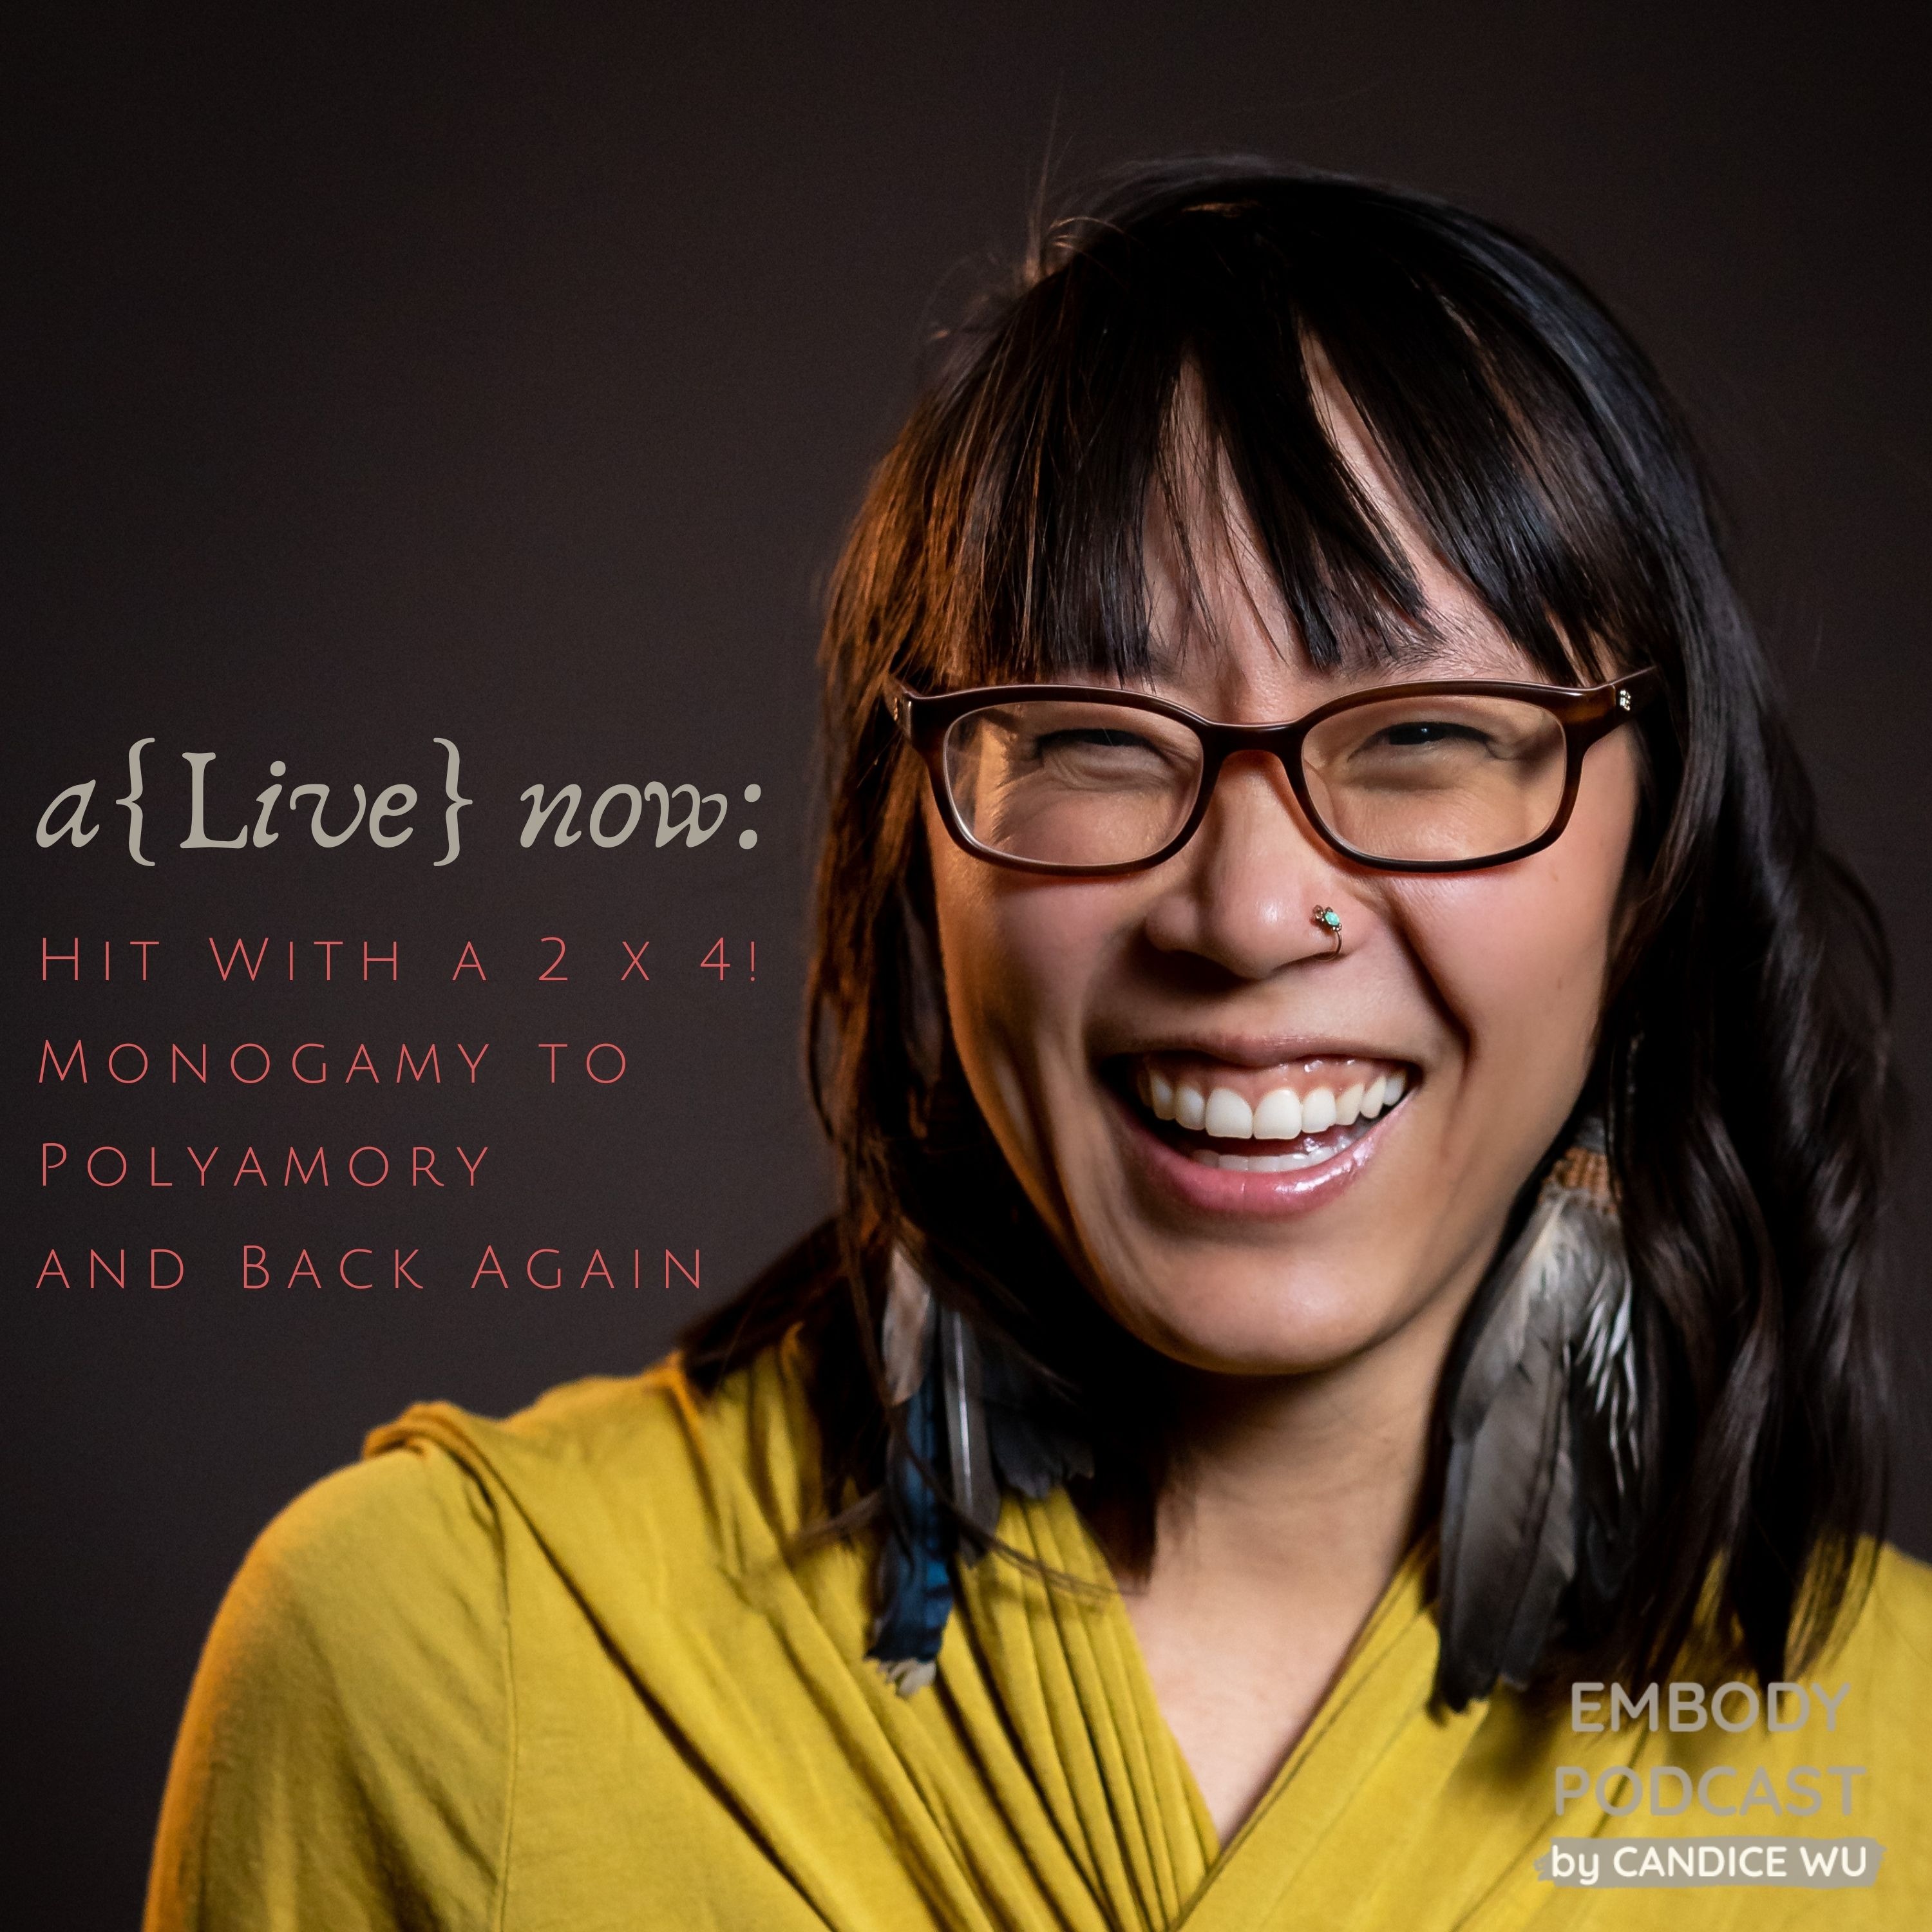 147: A{Live} Now: Hit With a 2 x 4! Monogamy to Polyamory and Back Again